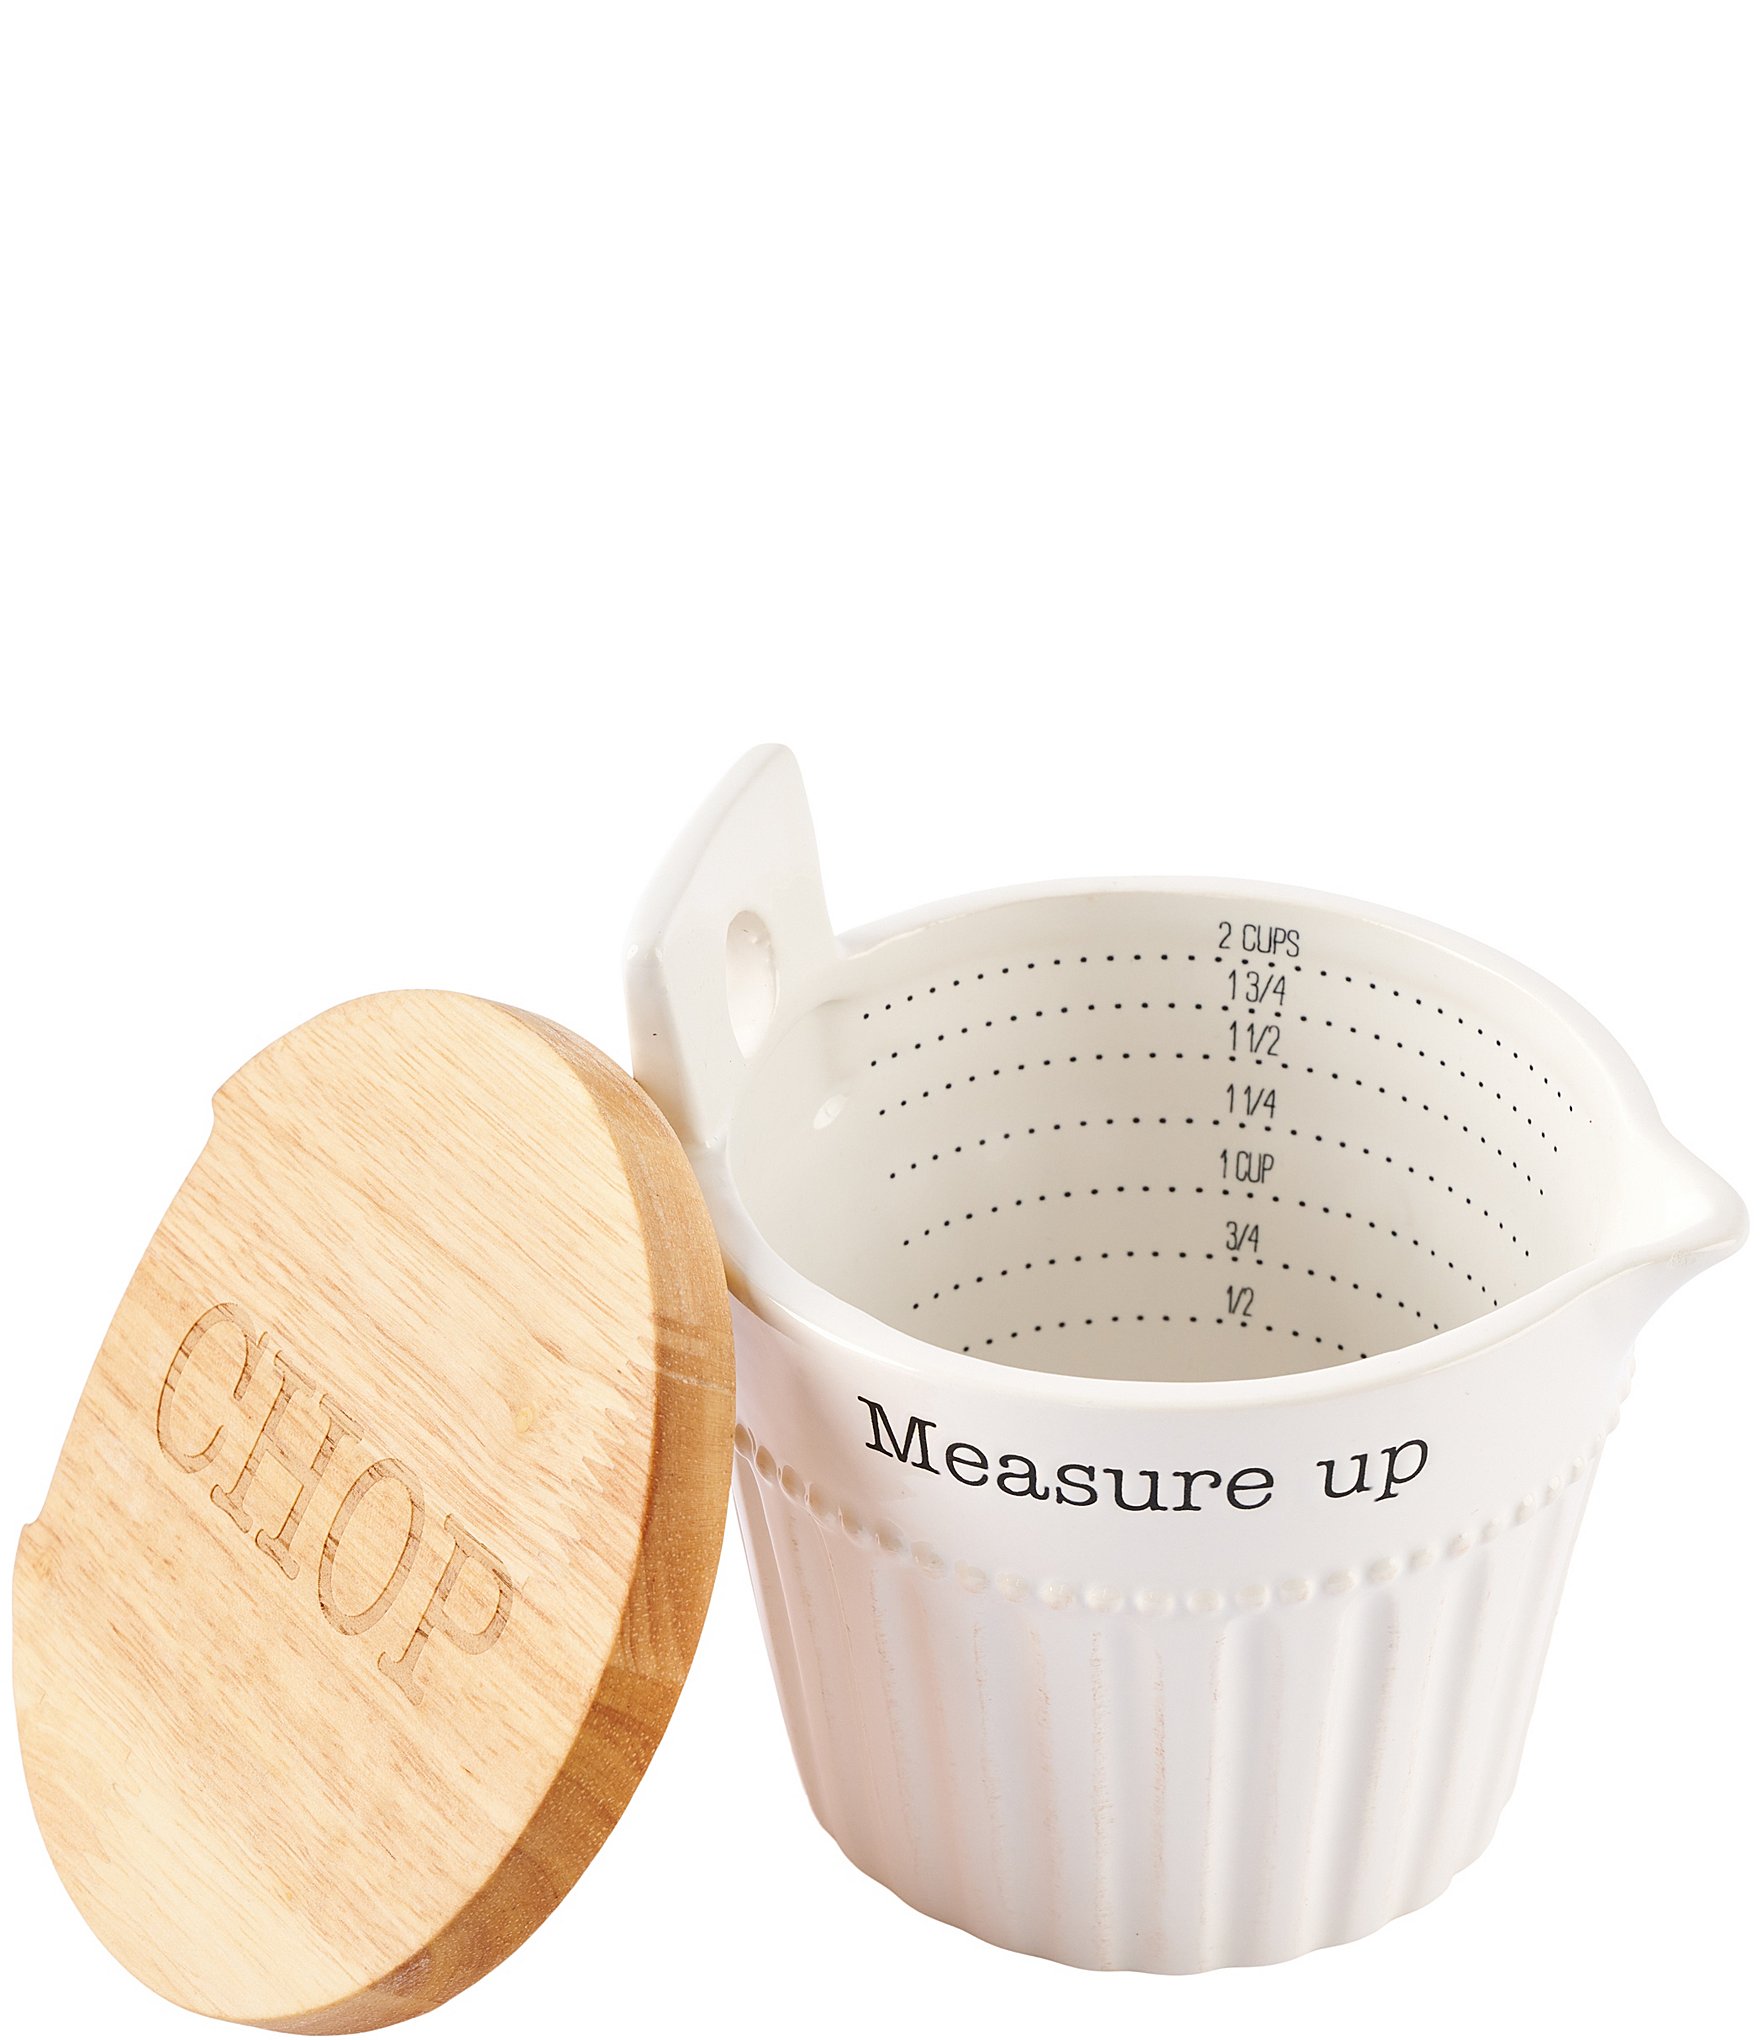 https://dimg.dillards.com/is/image/DillardsZoom/zoom/mud-pie-circa-collection-measuring-cup-and-board-set/20258219_zi.jpg